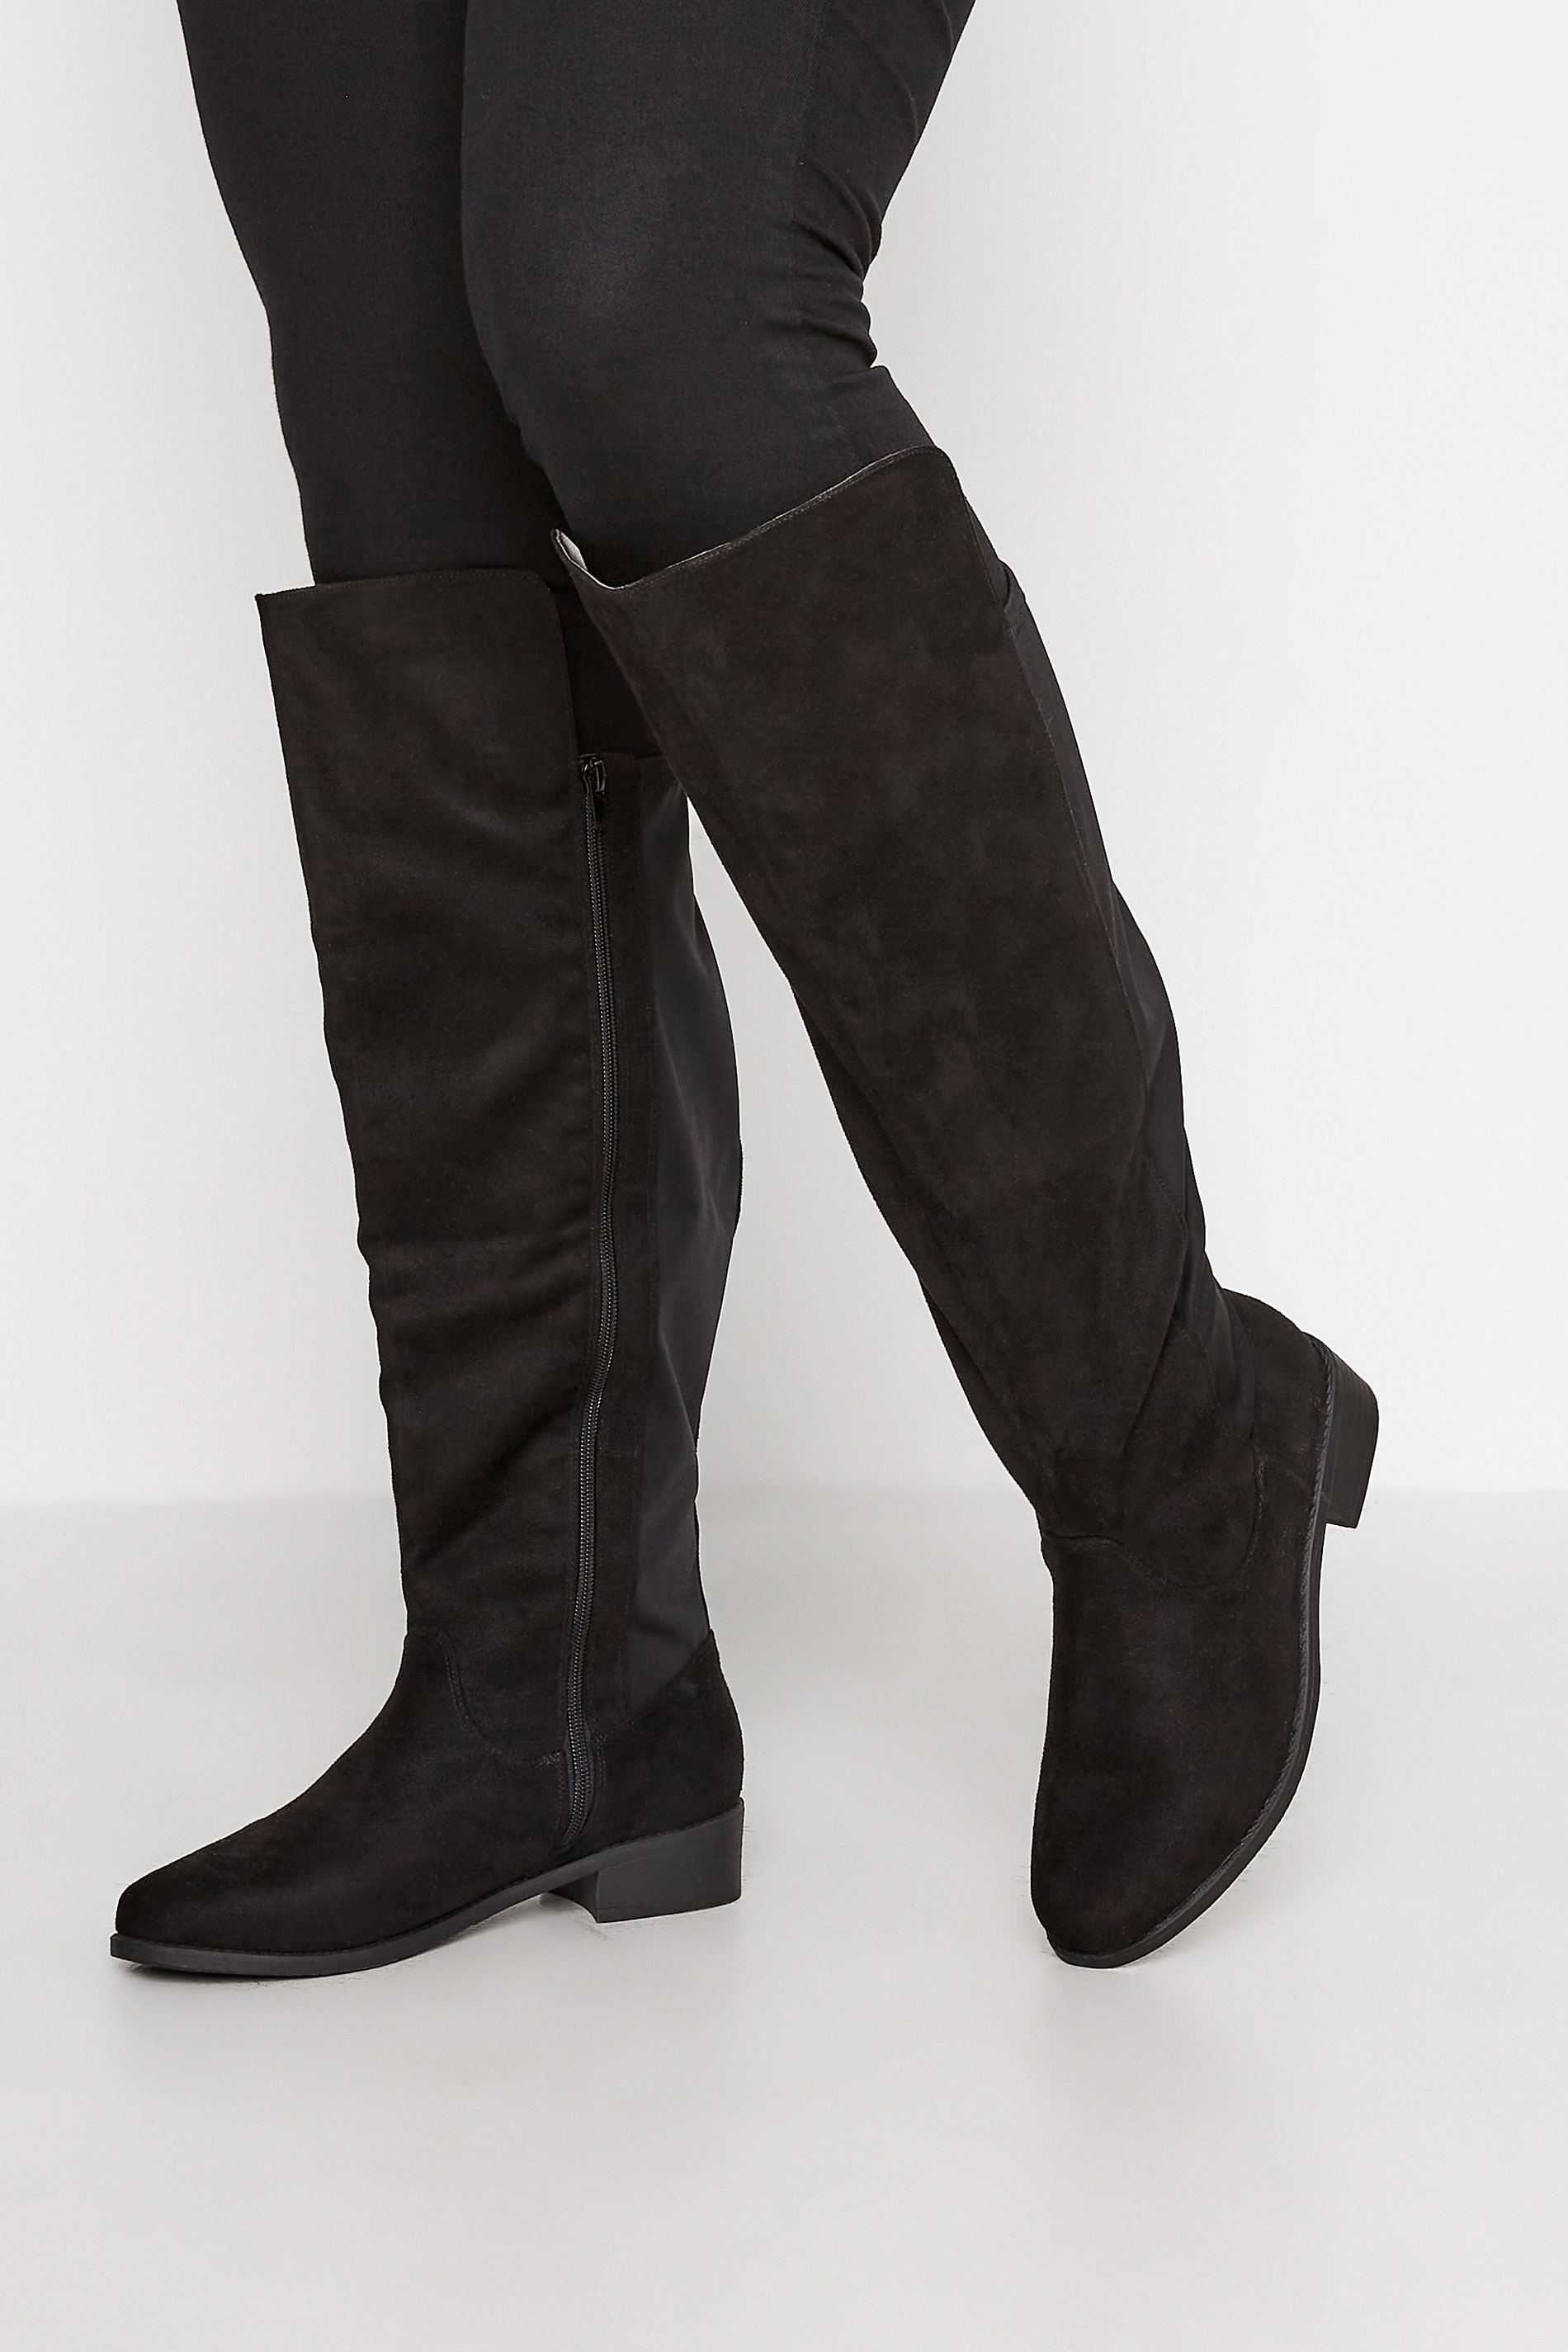 Black Suede Stretch Knee High Boots In Wide E Fit & Extra Wide EEE Fit | Yours Clothing 1